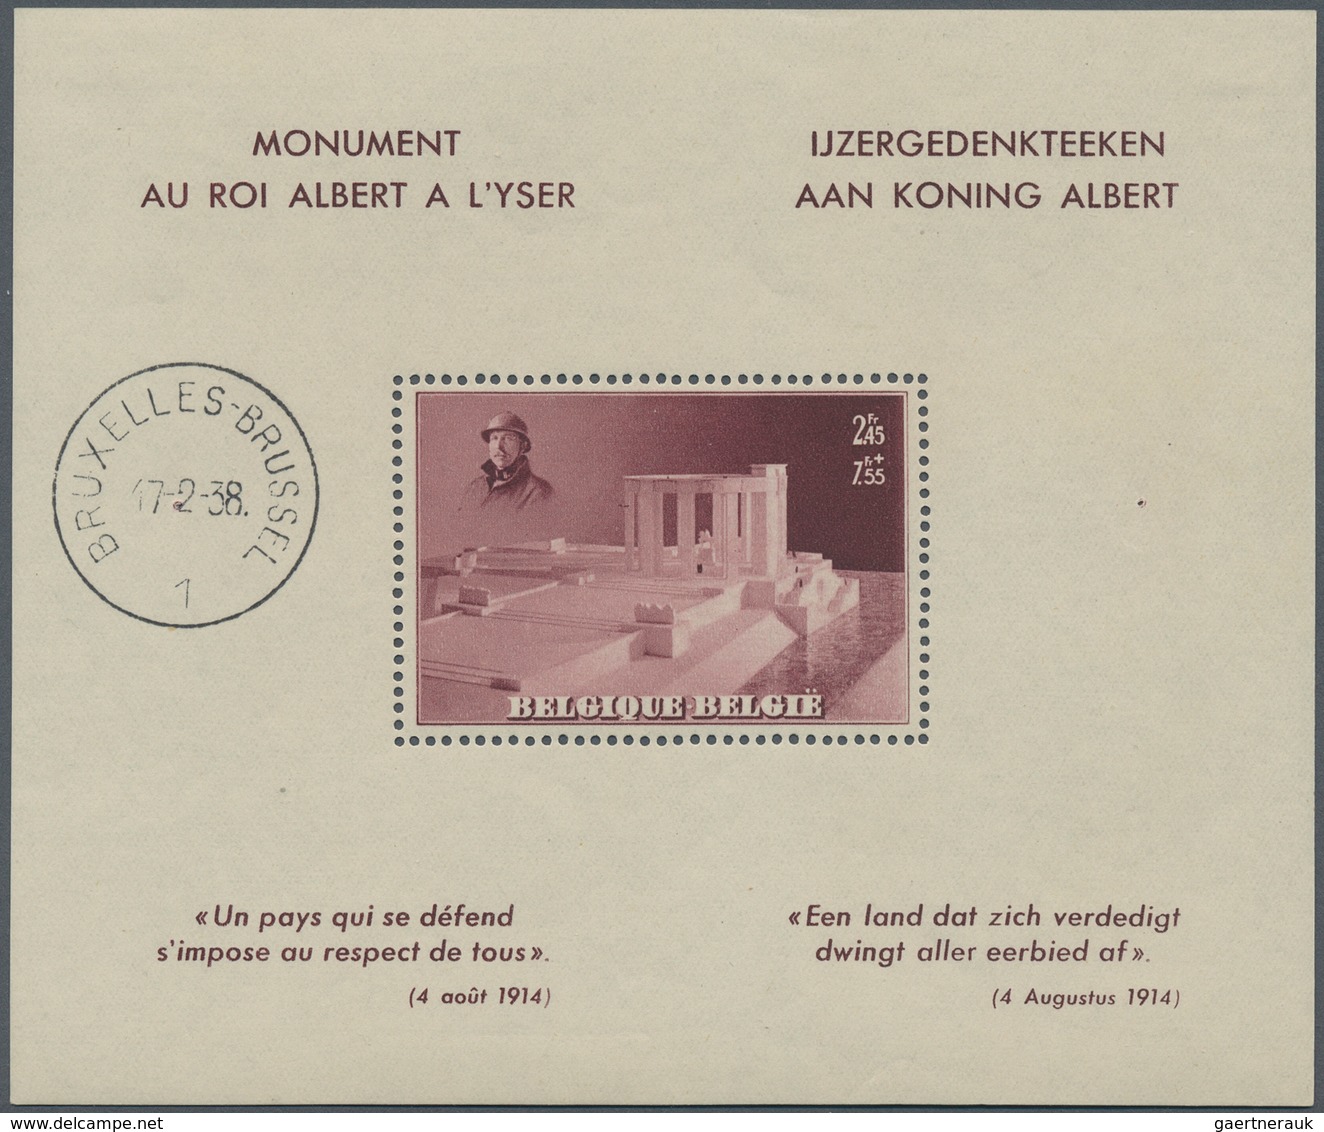 26109 Belgien: 1924 up to now (approx). Box with souvenir and miniature sheets only, several hundred piece